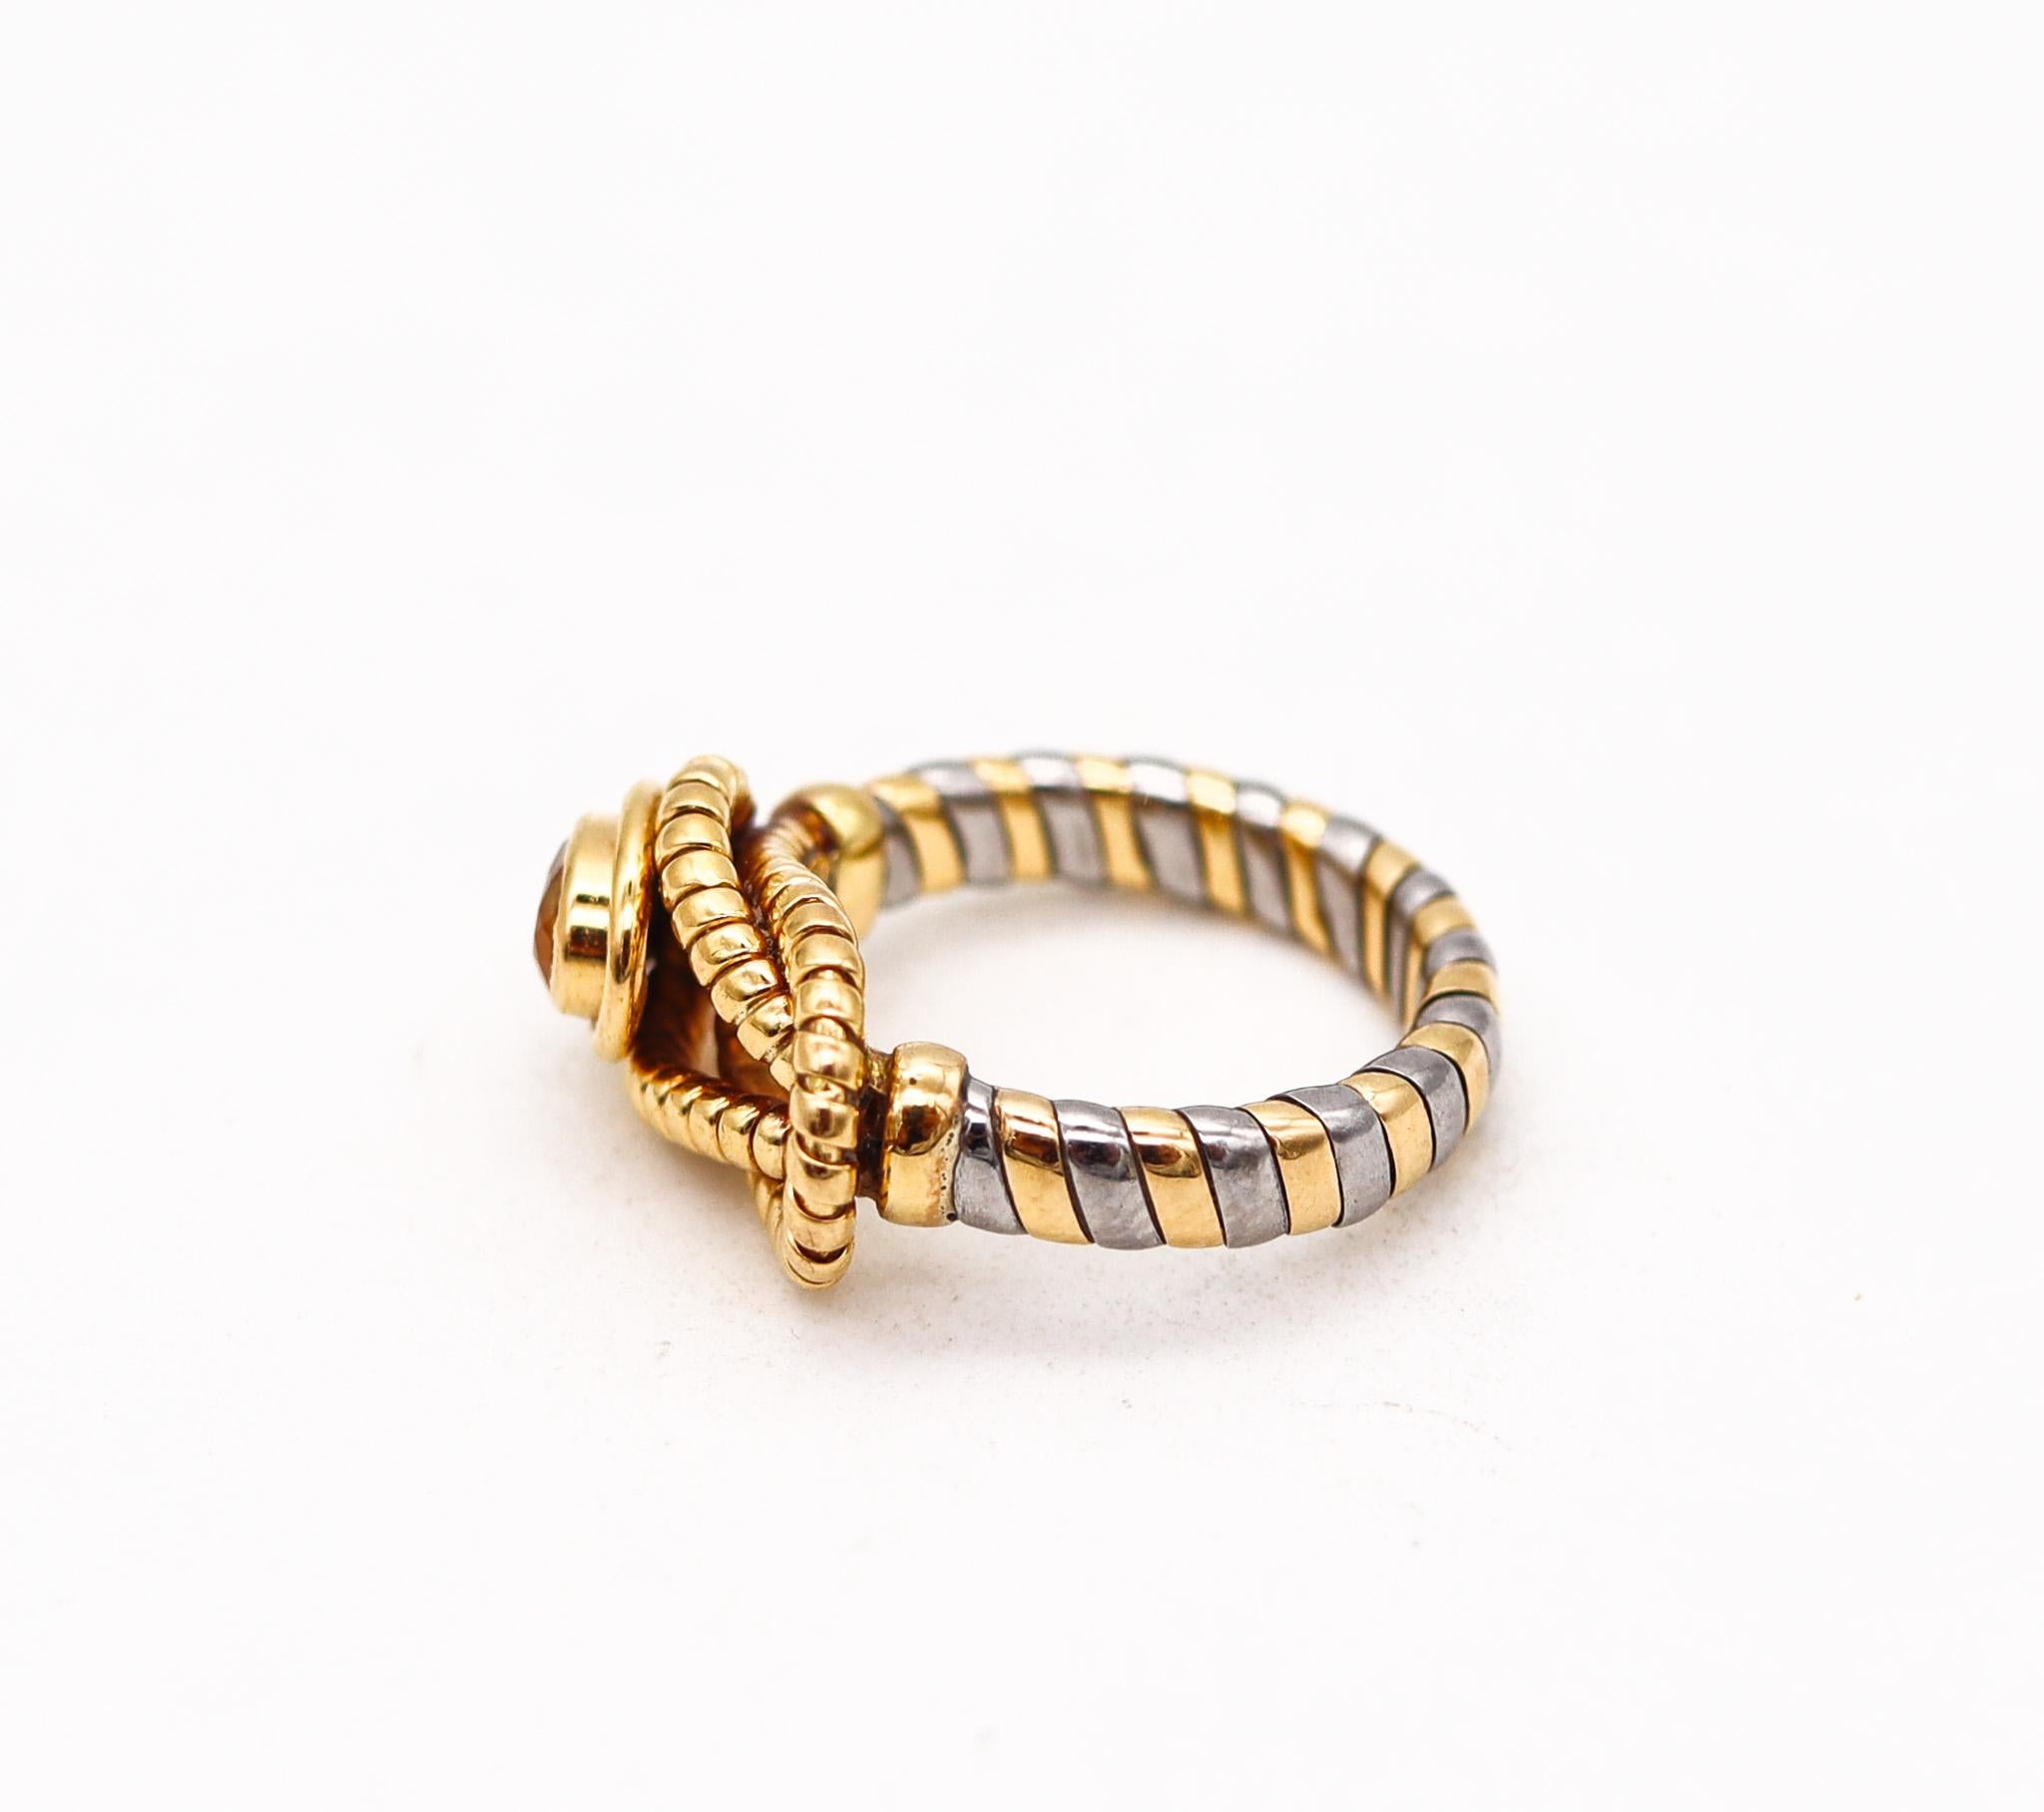 Oval Cut Cartier Tubogas Hercules Knot Ring in Stainless and 18 Karat Gold with Citrine